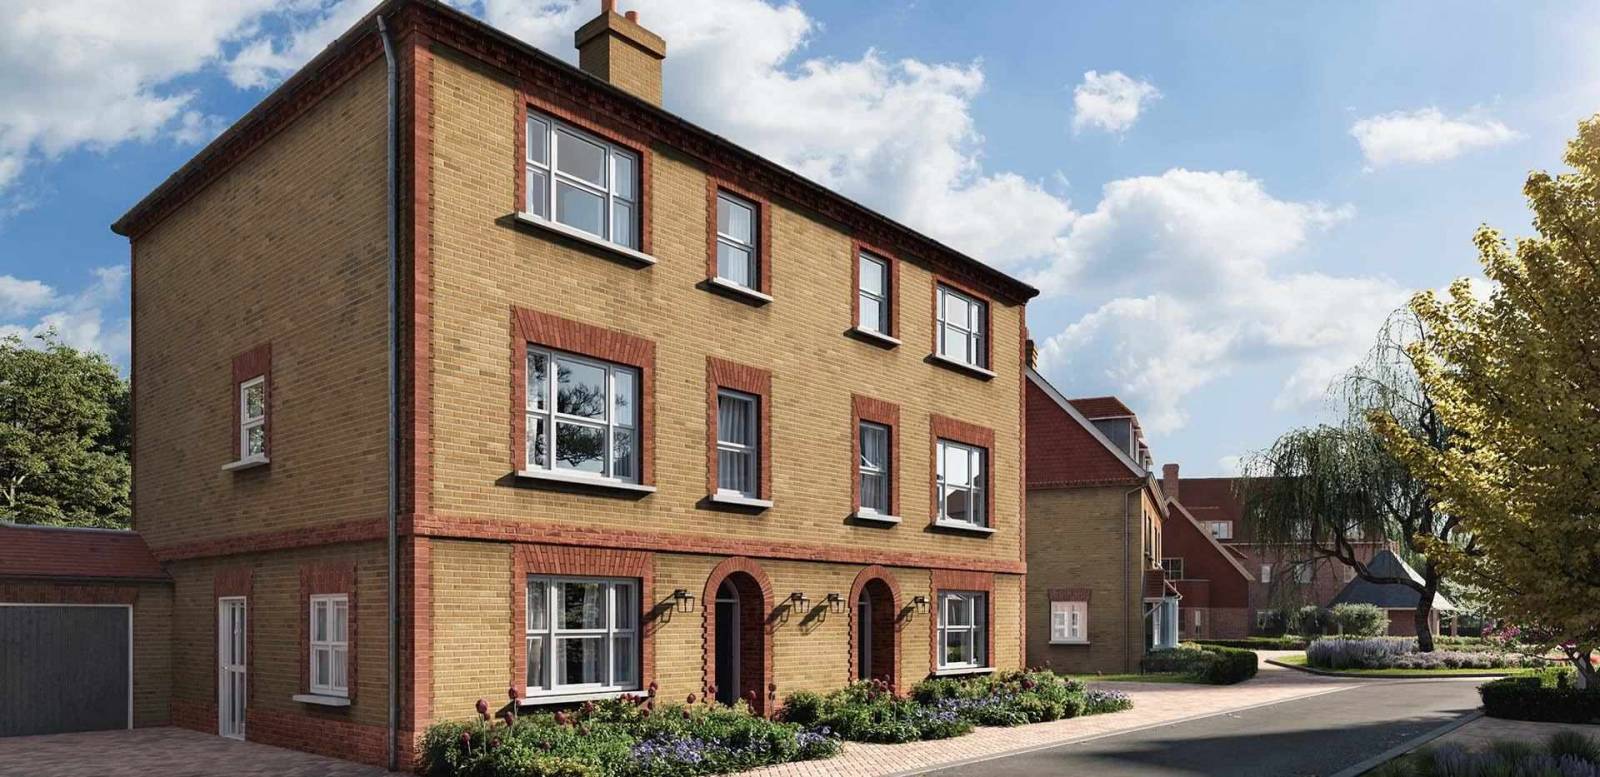 New homes in Enfield